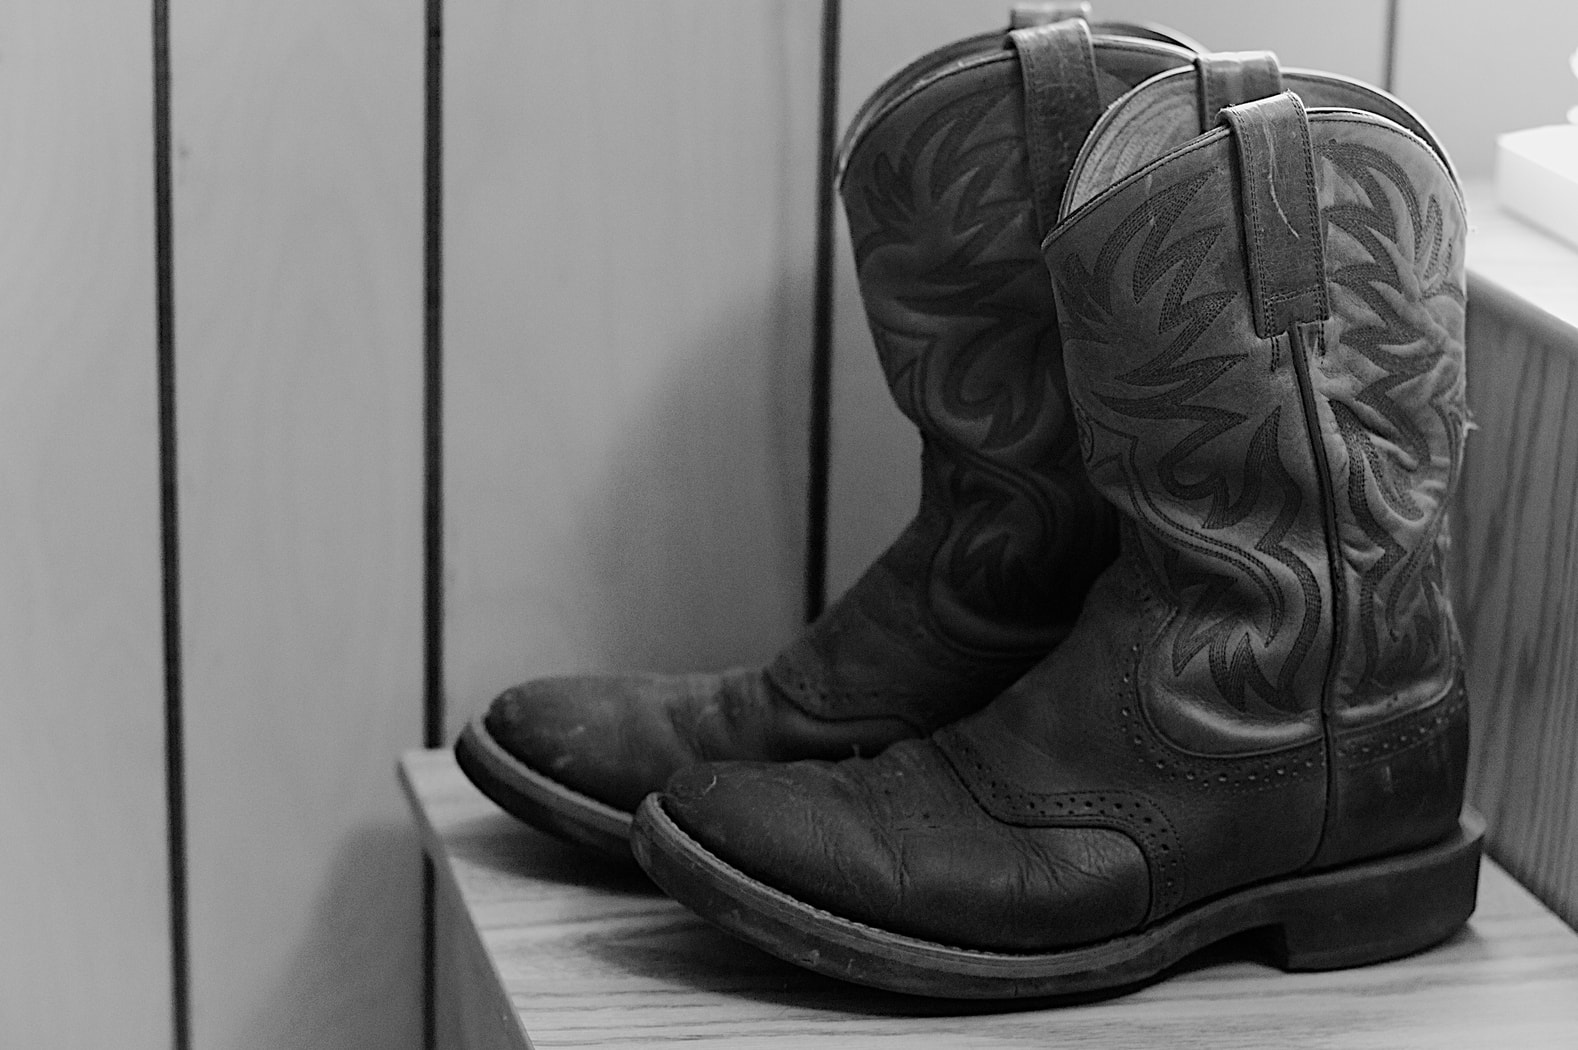 most comfortable ariat work boots